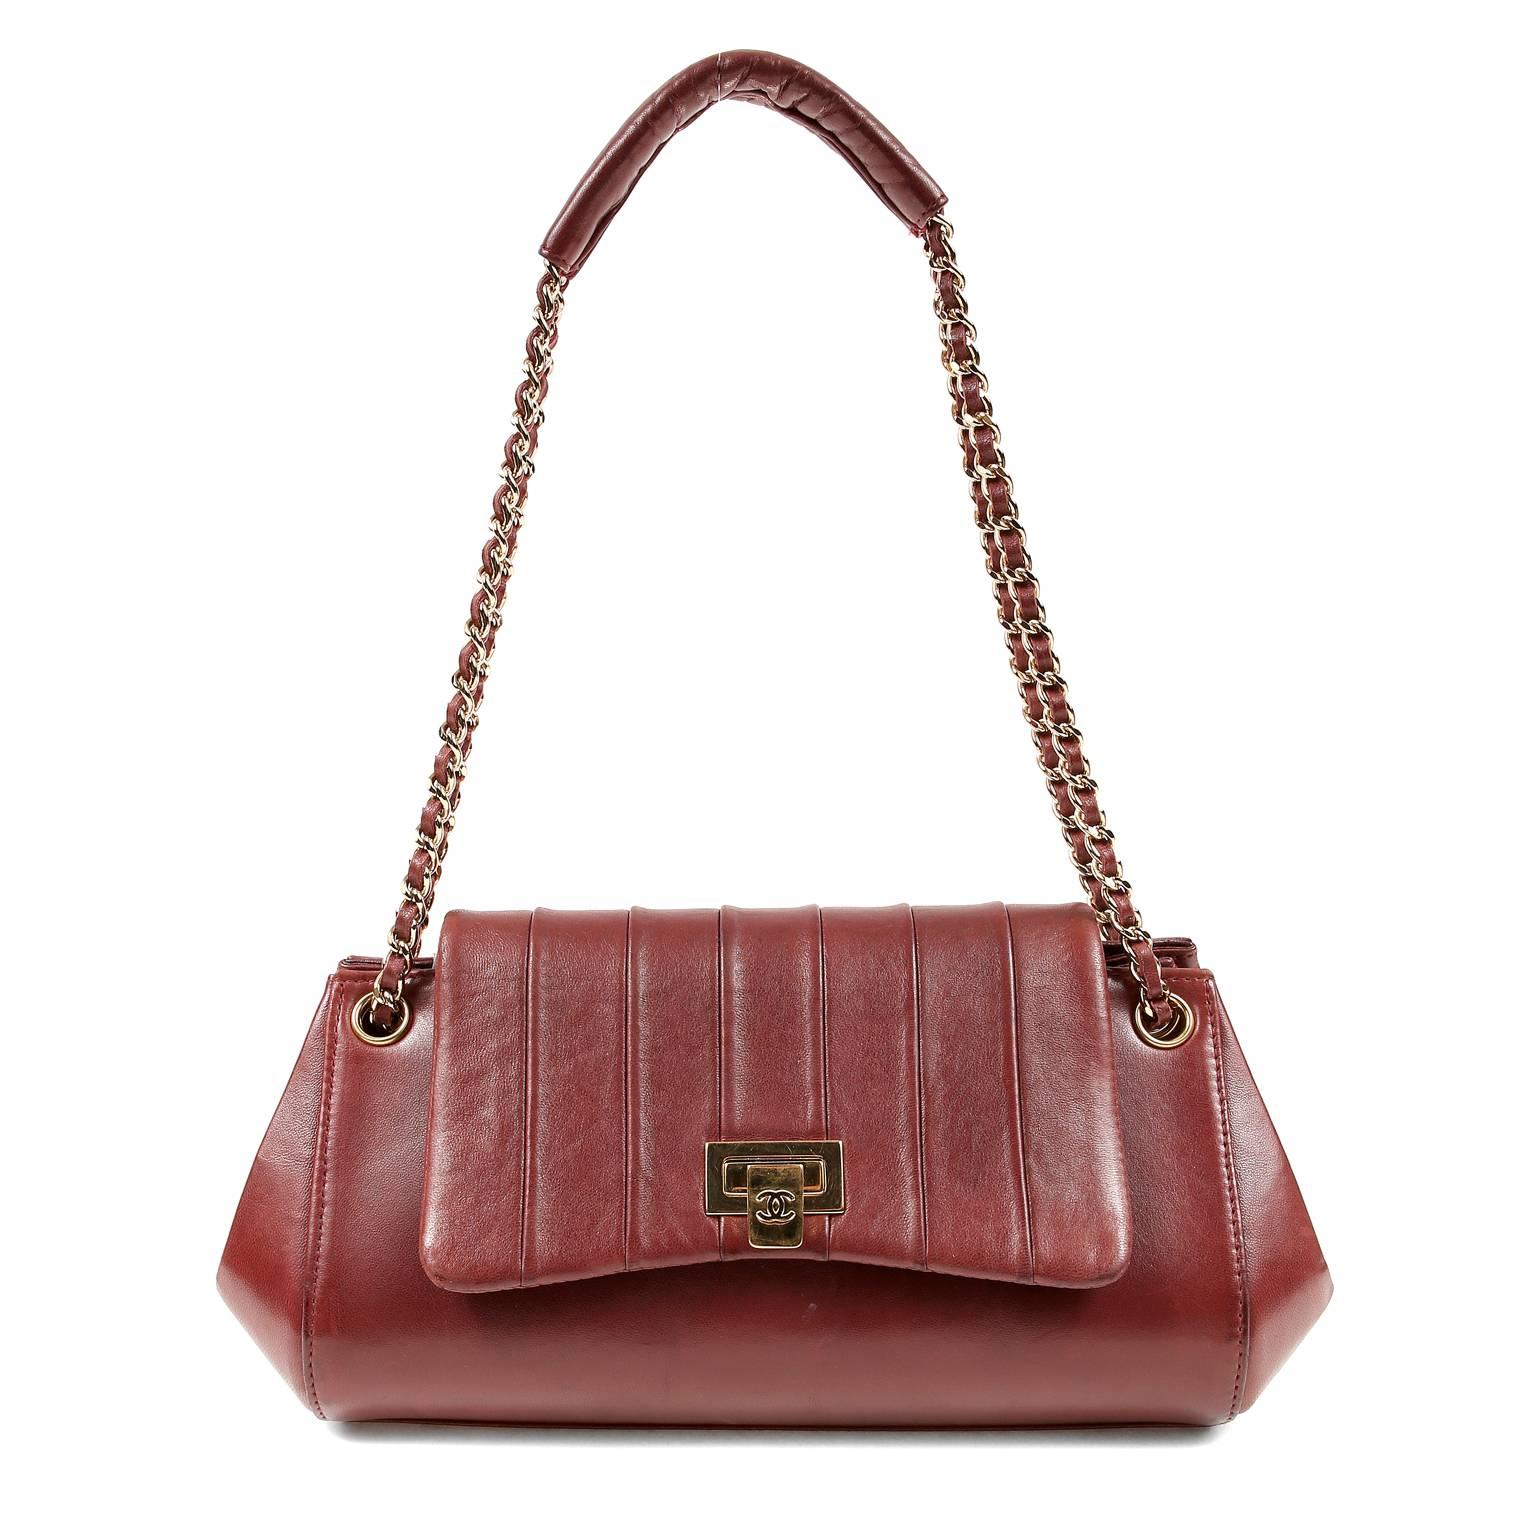 Chanel Burgundy Leather  Accordion Flap Bag For Sale 5